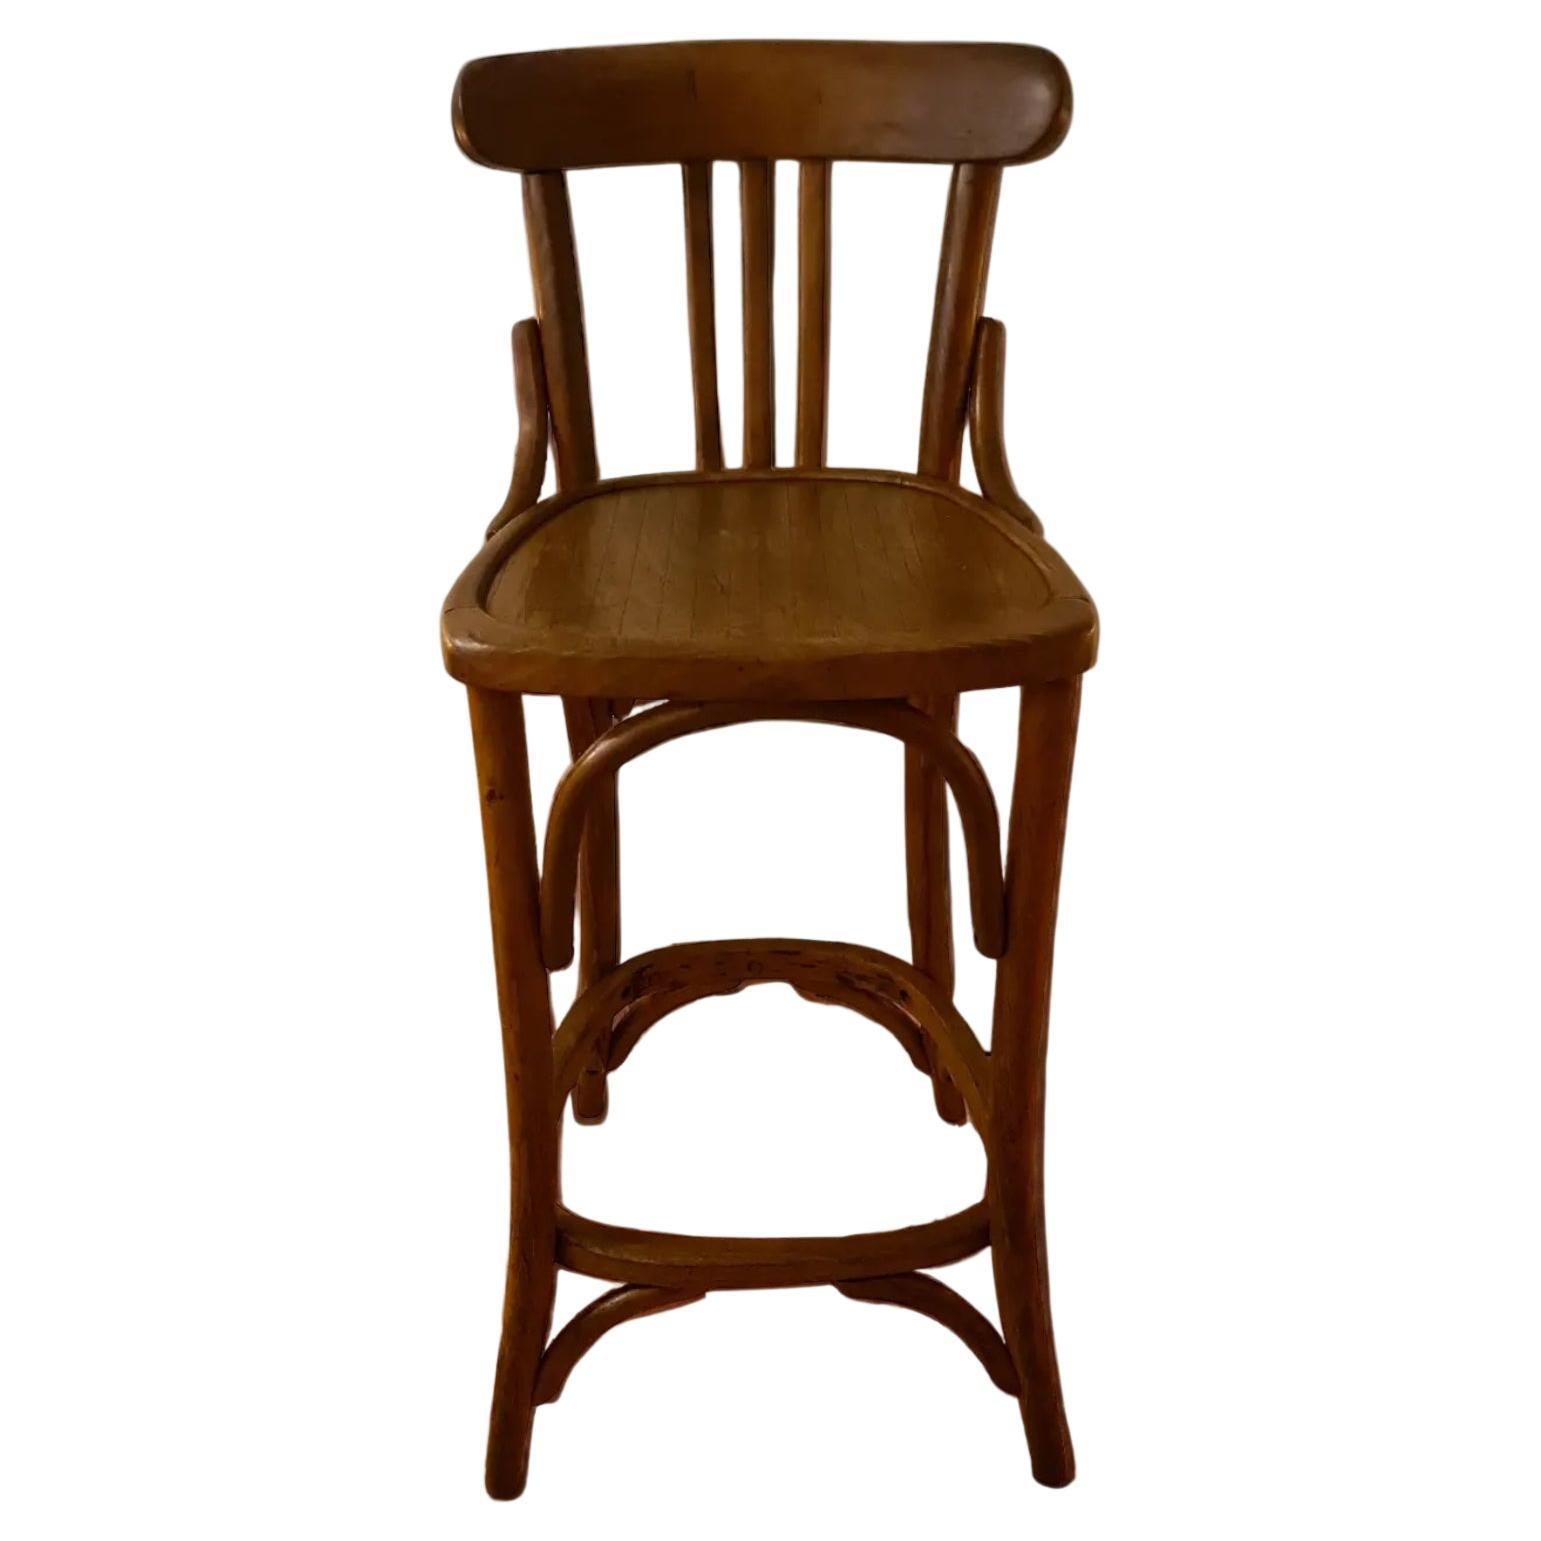 Thonet Style High Stool in Curved Wood, 20th Century For Sale